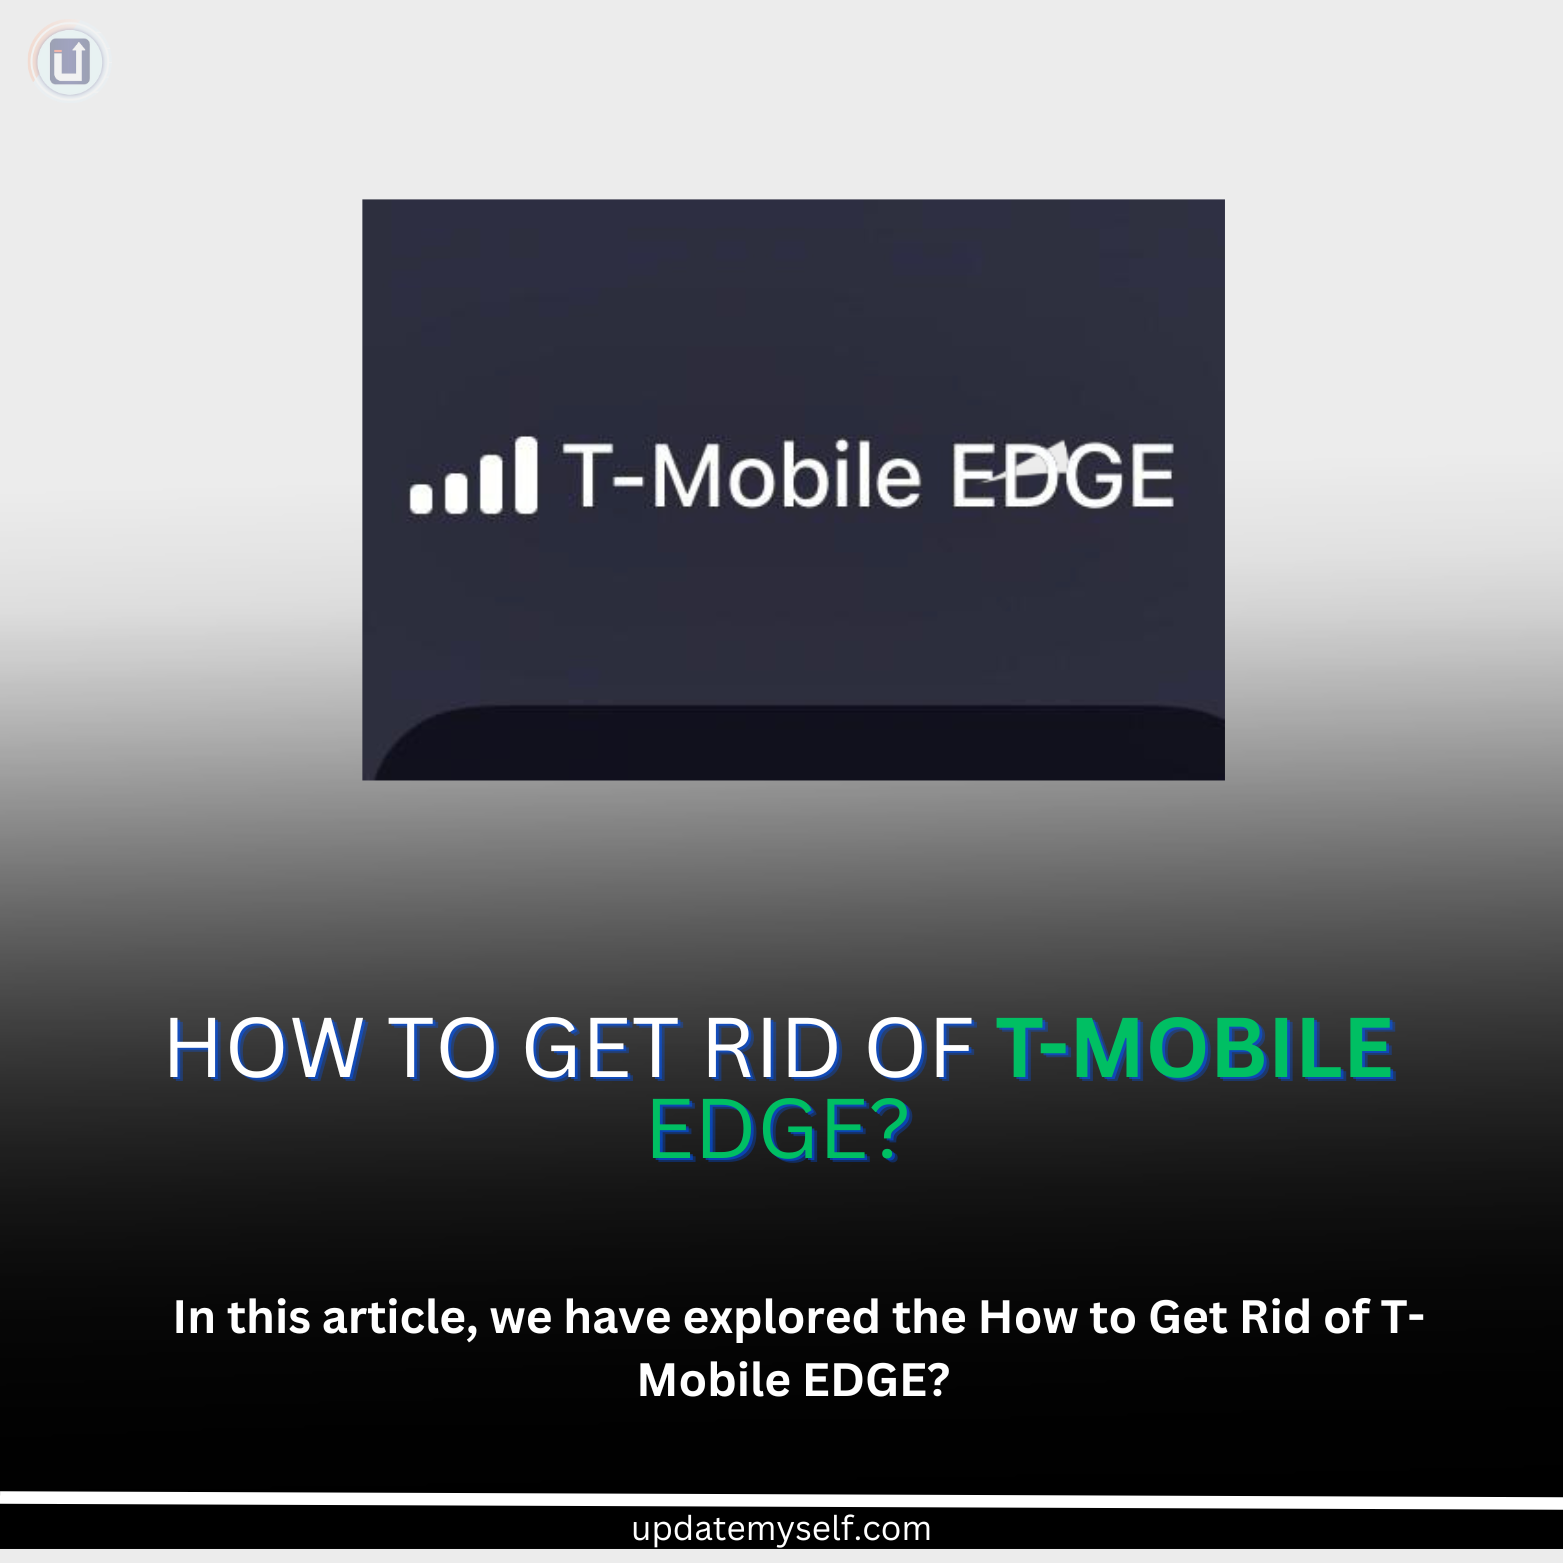 How to Get Rid of T-Mobile EDGE